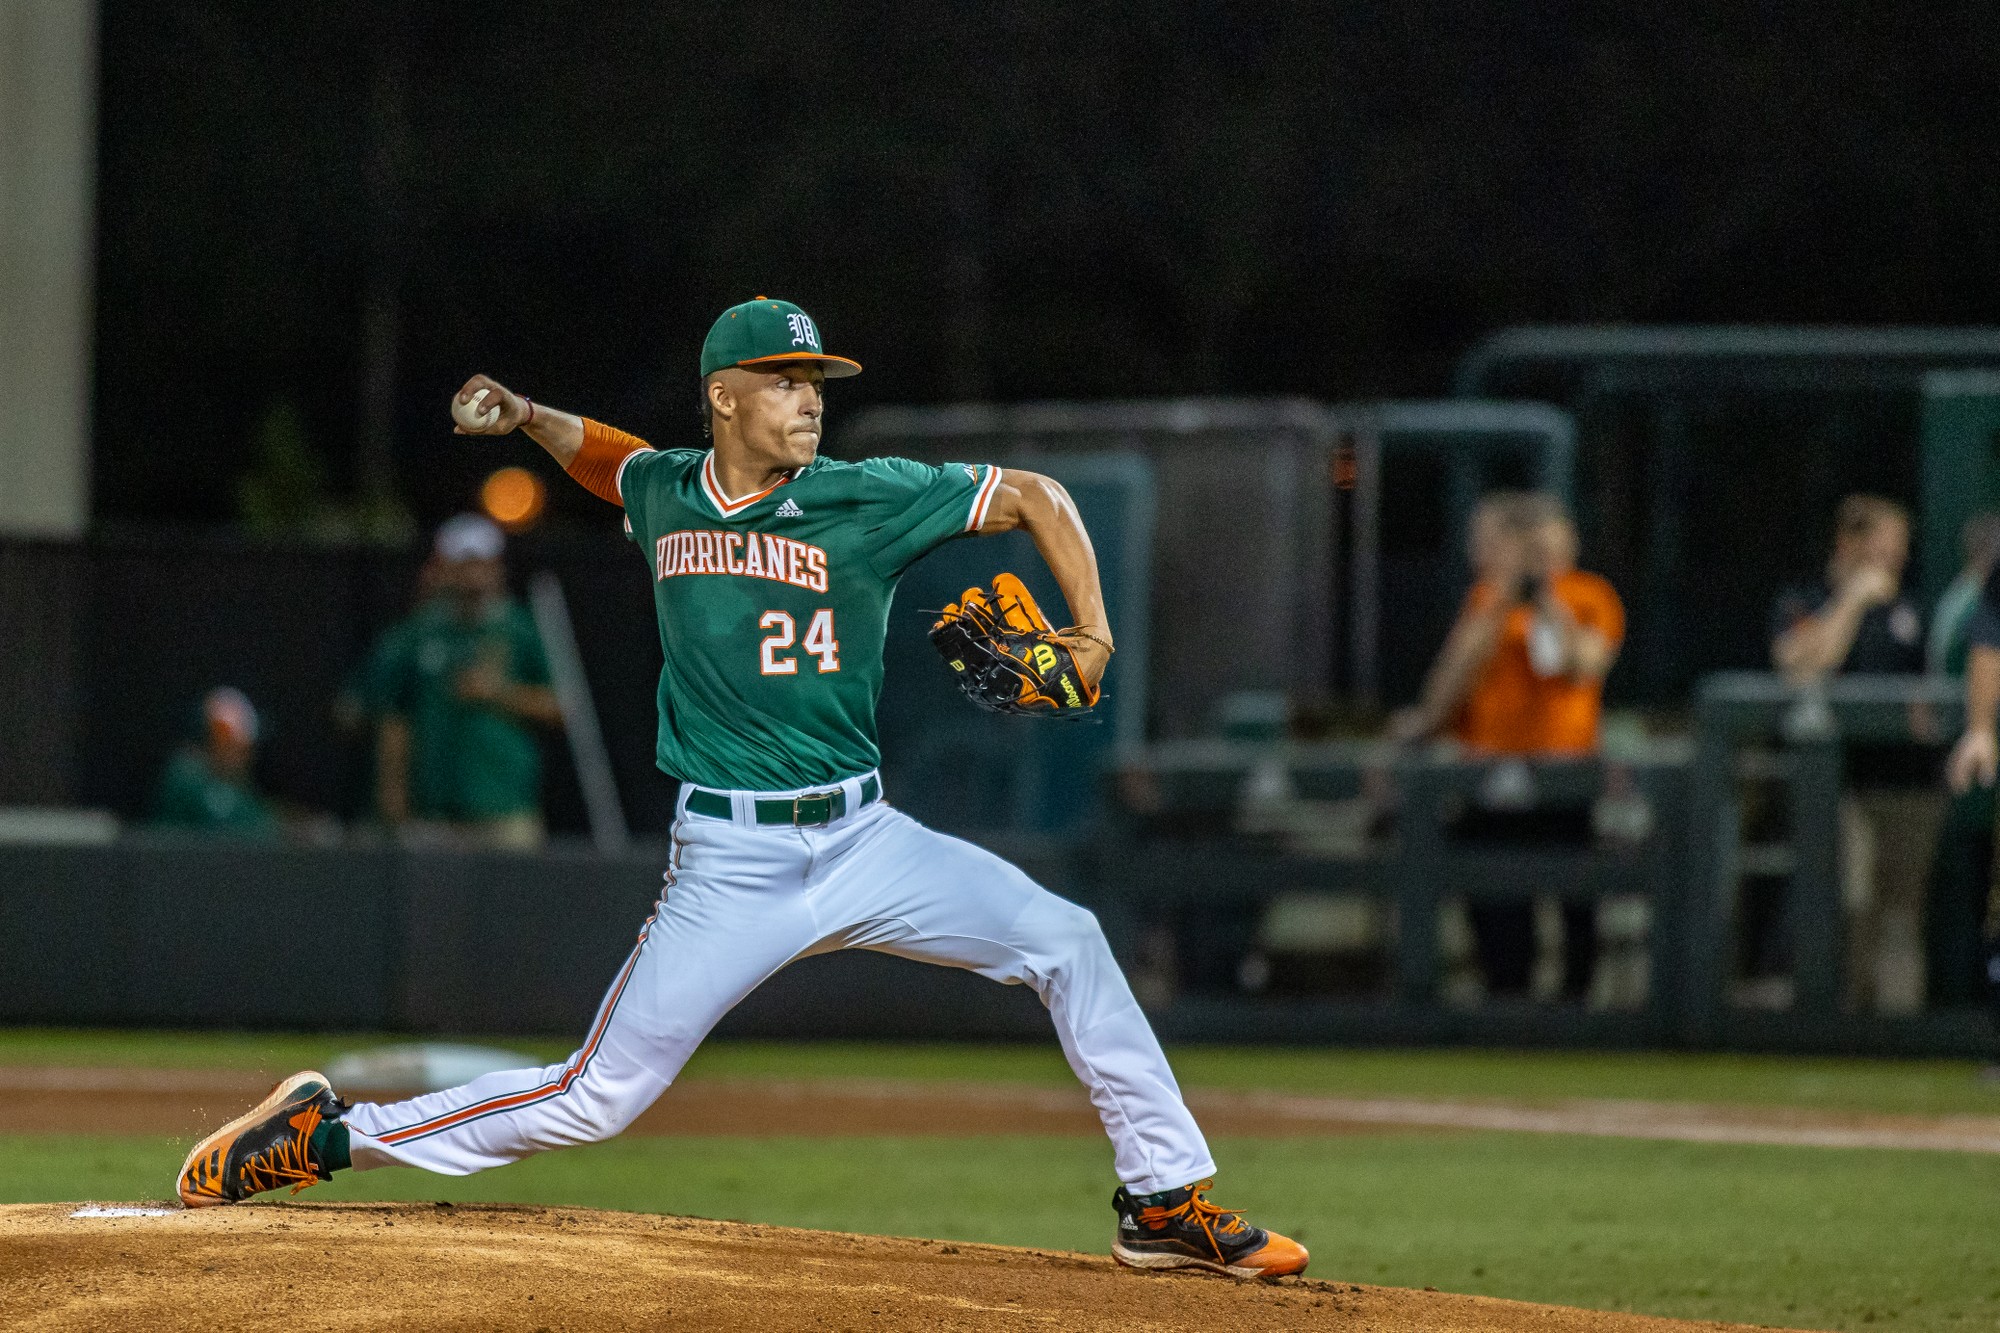 Sixth-inning surge powers Miami past Towson to open series - The